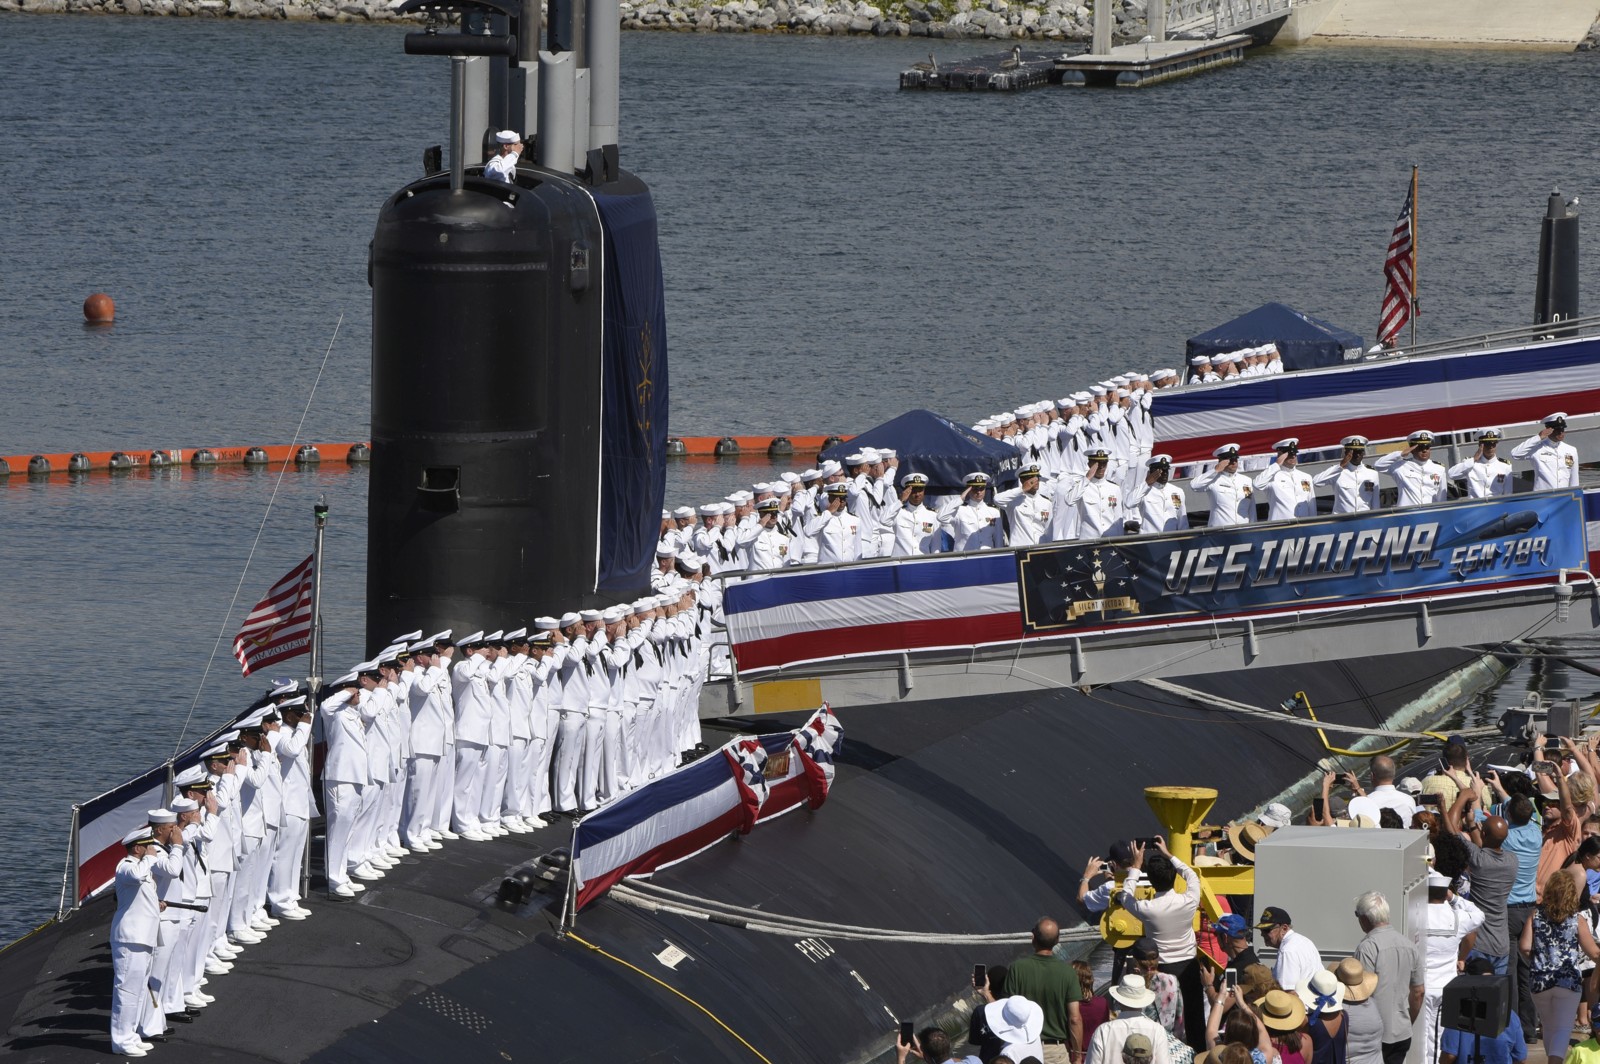 ssn-789 uss indiana virginia class attack submarine us navy commissioning ceremony port canaveral florida 33a